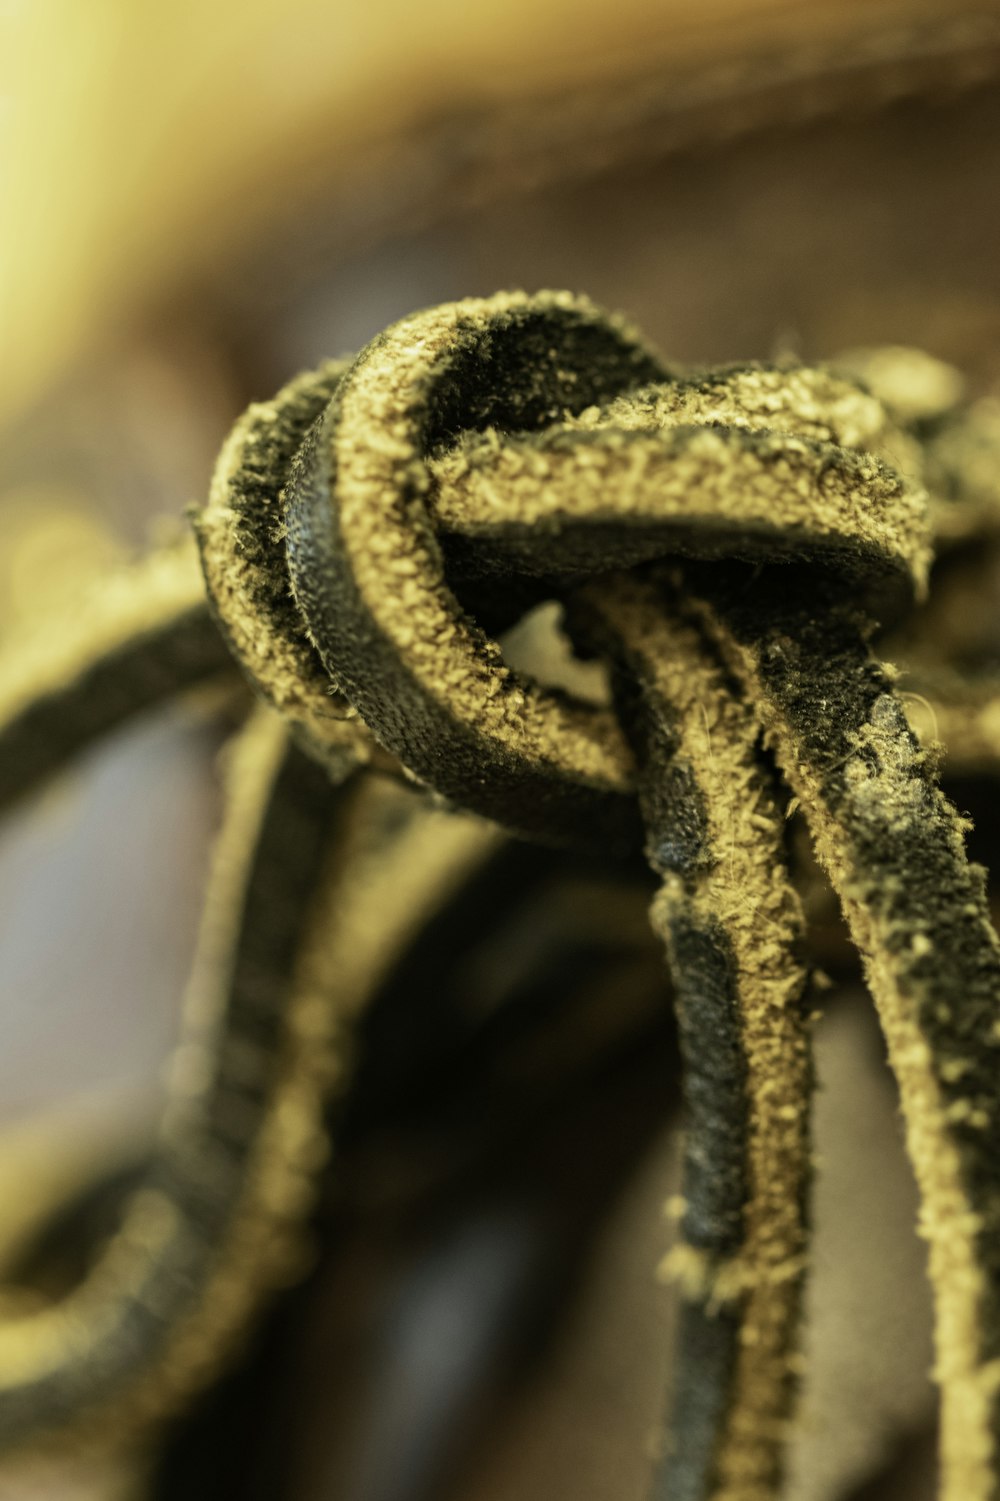 a close up of a leather shoe lace